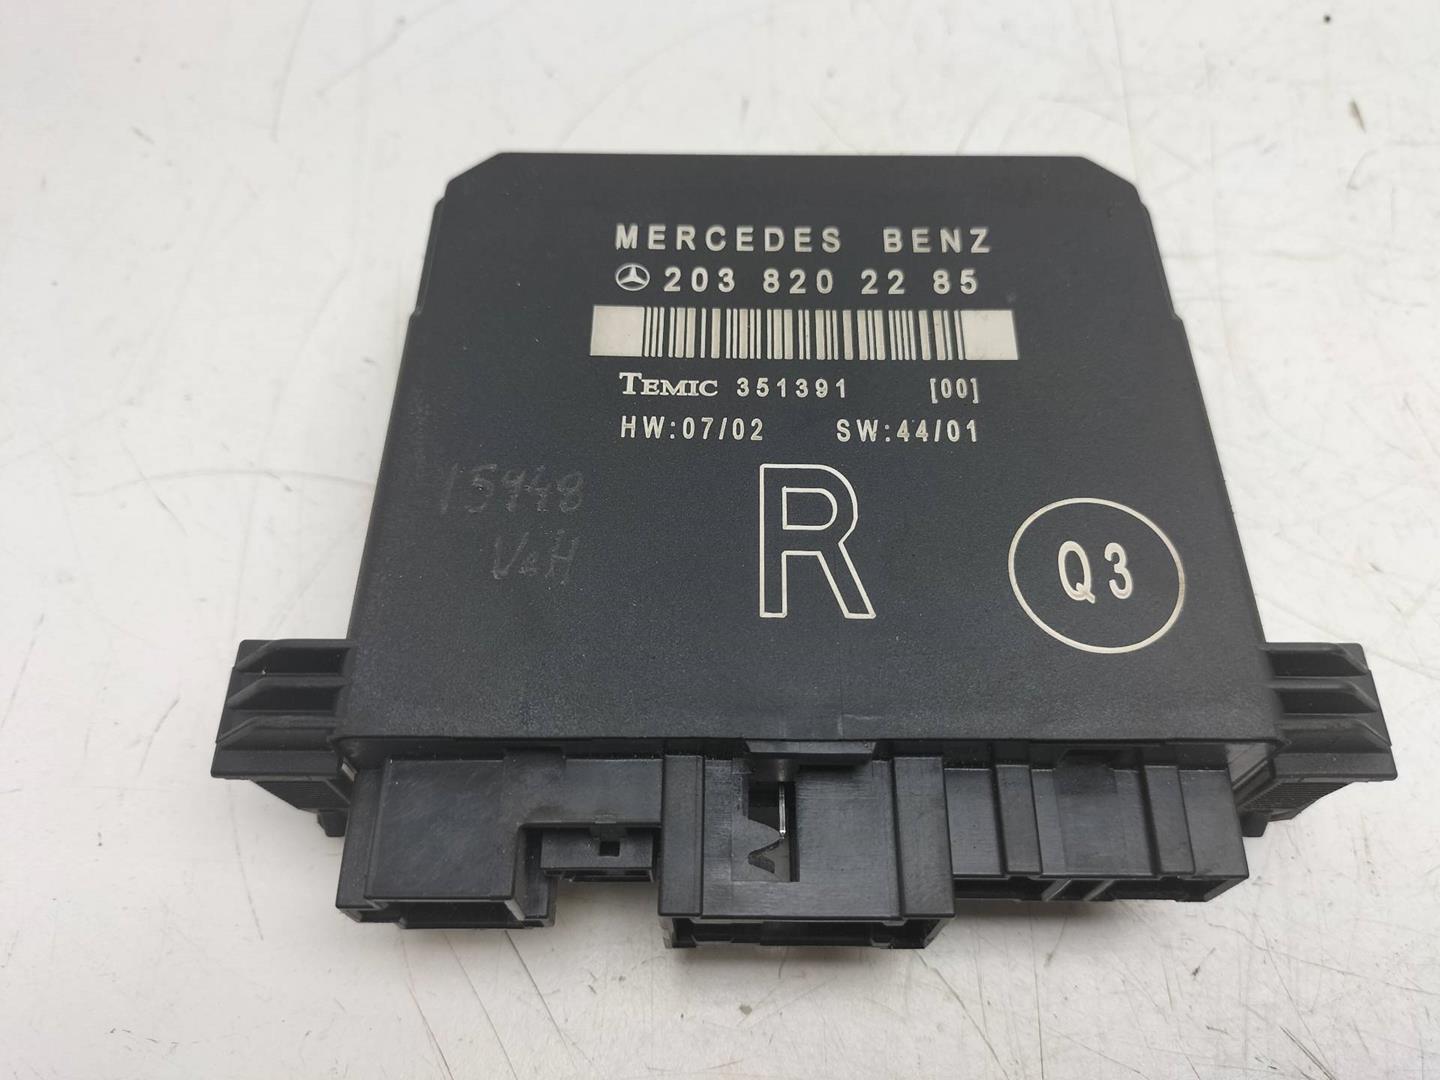 MERCEDES-BENZ C-Class W203/S203/CL203 (2000-2008) Other Control Units 2038202285, 351391, TEMIC 19226594